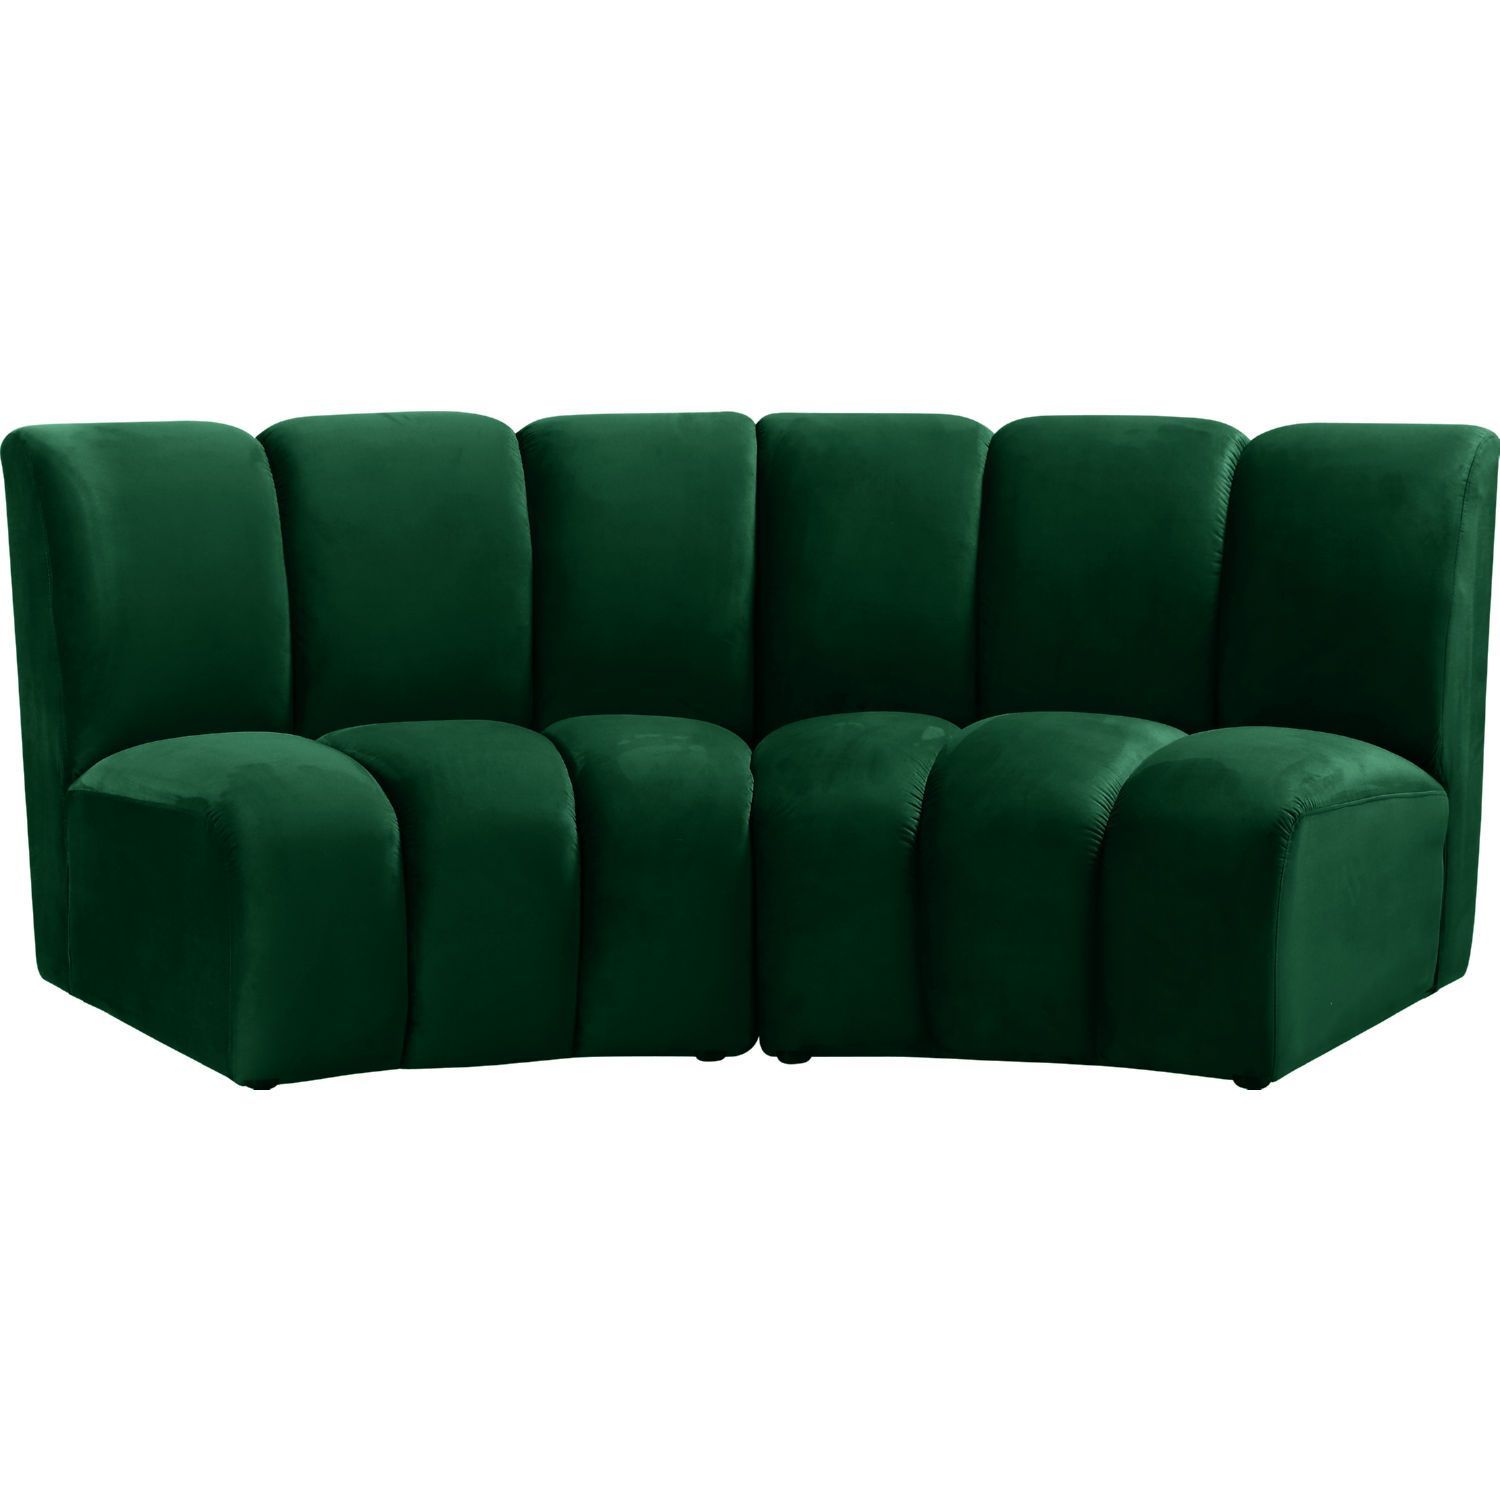 Meridian Furniture 638green 5pc Infinity 5 Piece Modular Sectional Sofa Intended For Green Velvet Modular Sectionals (Gallery 2 of 20)